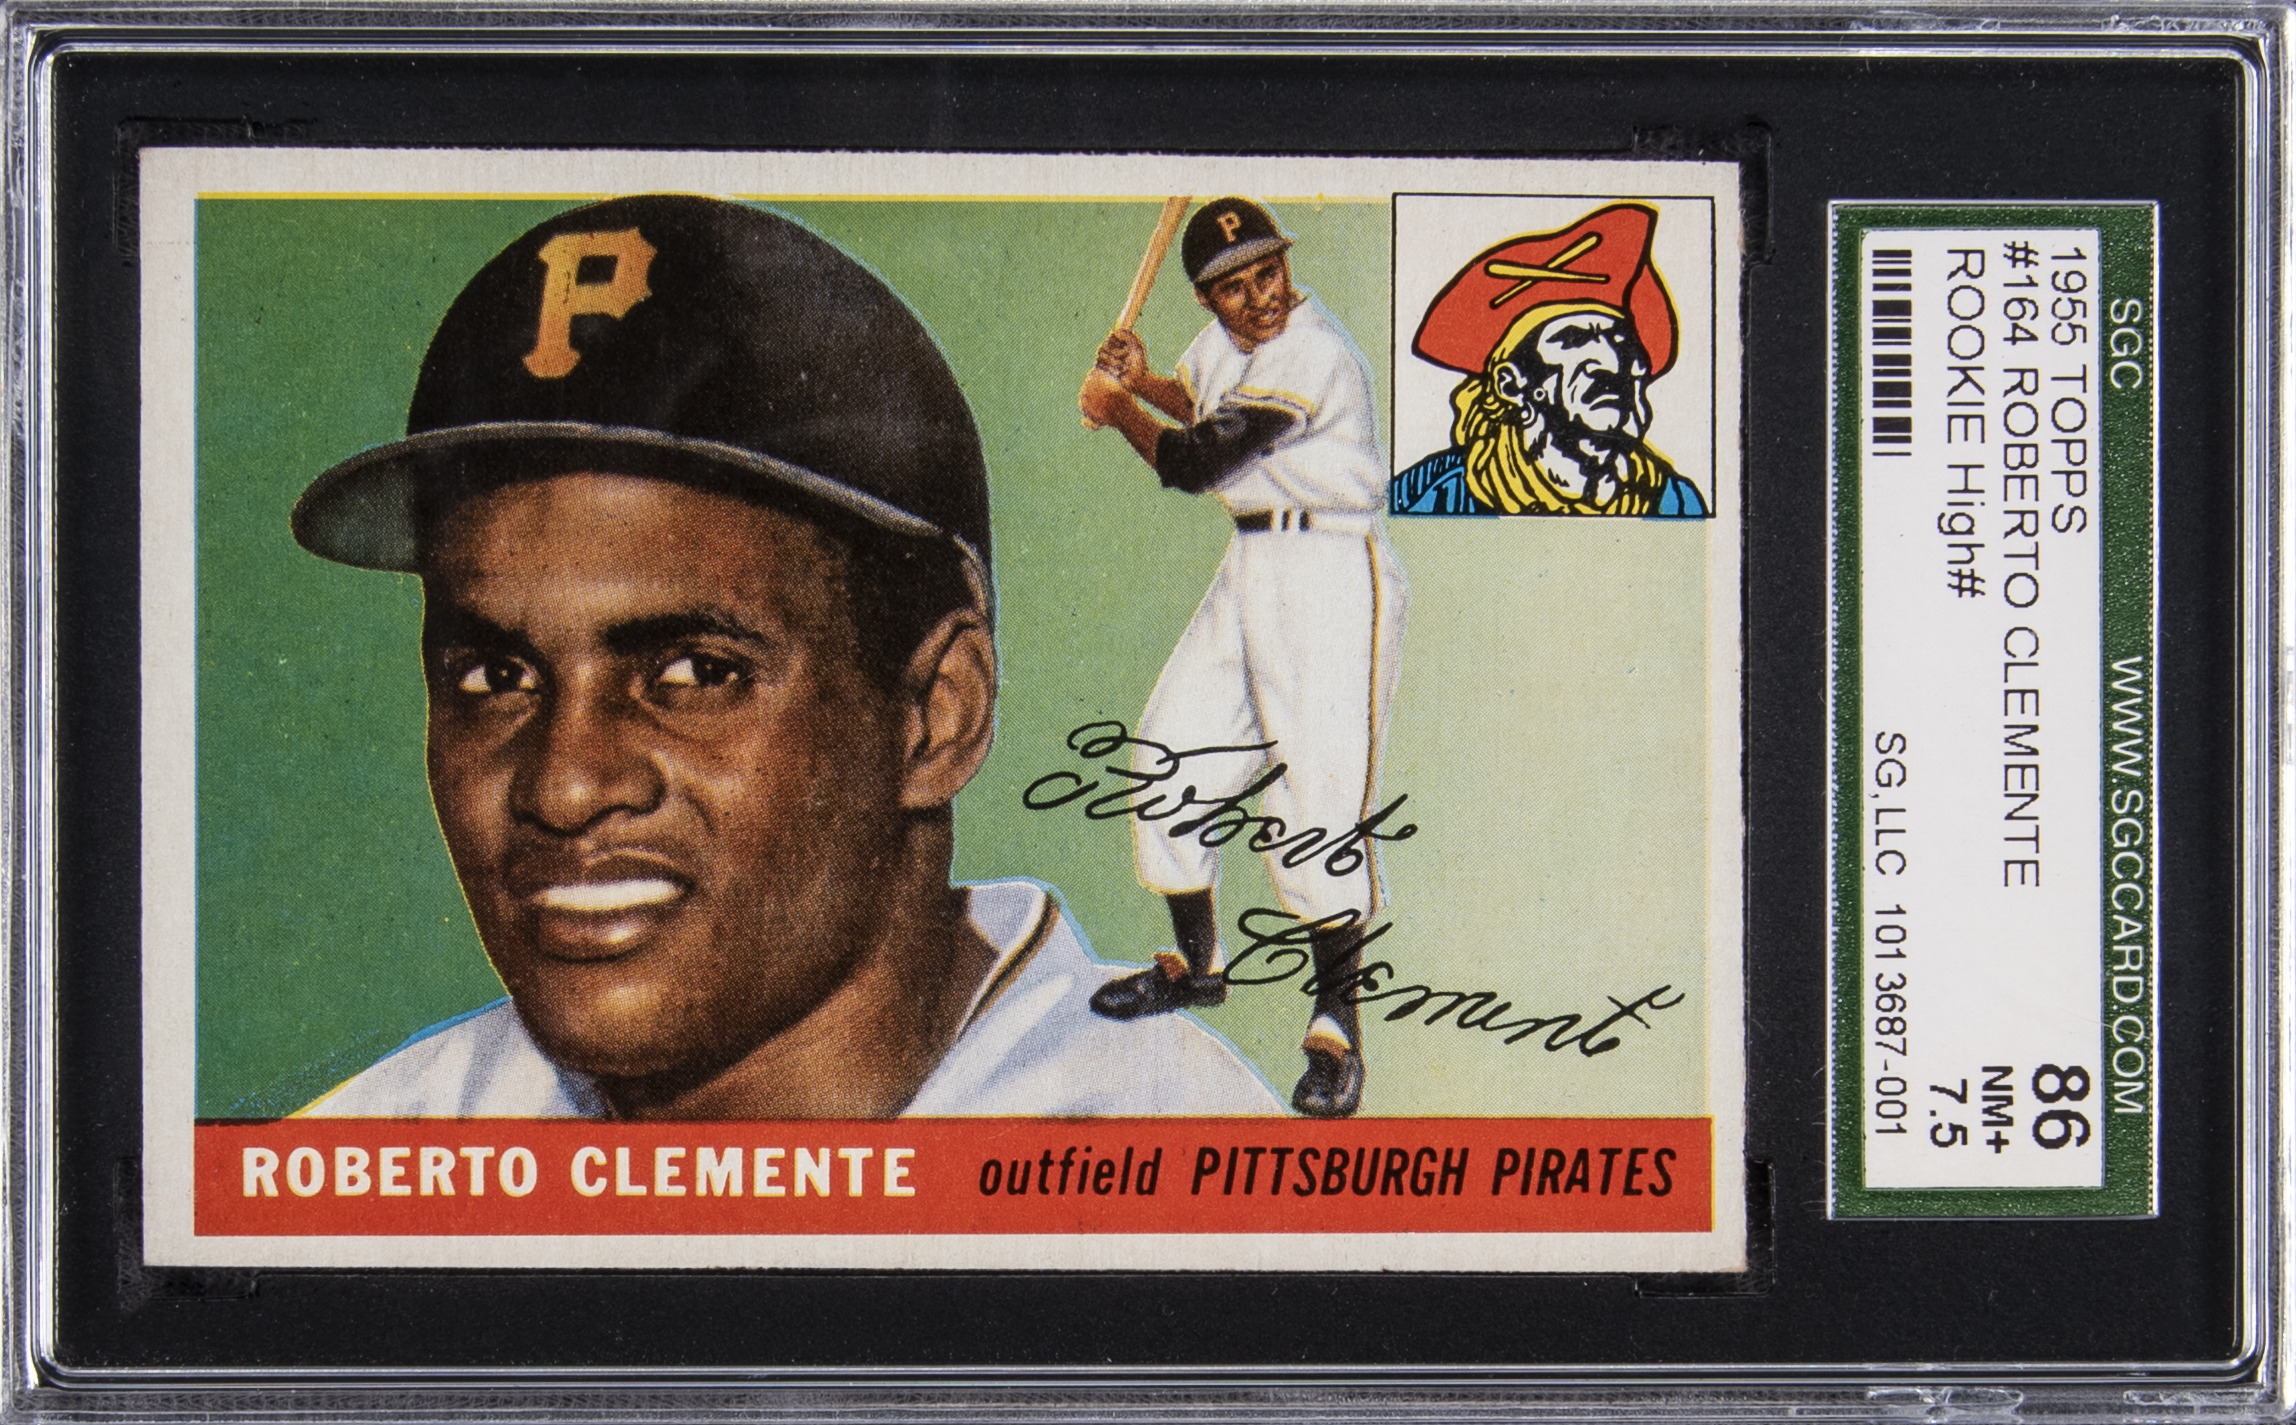 1955 Topps #164 Roberto Clemente Rookie Card - SGC 86 NM+ 7.5.